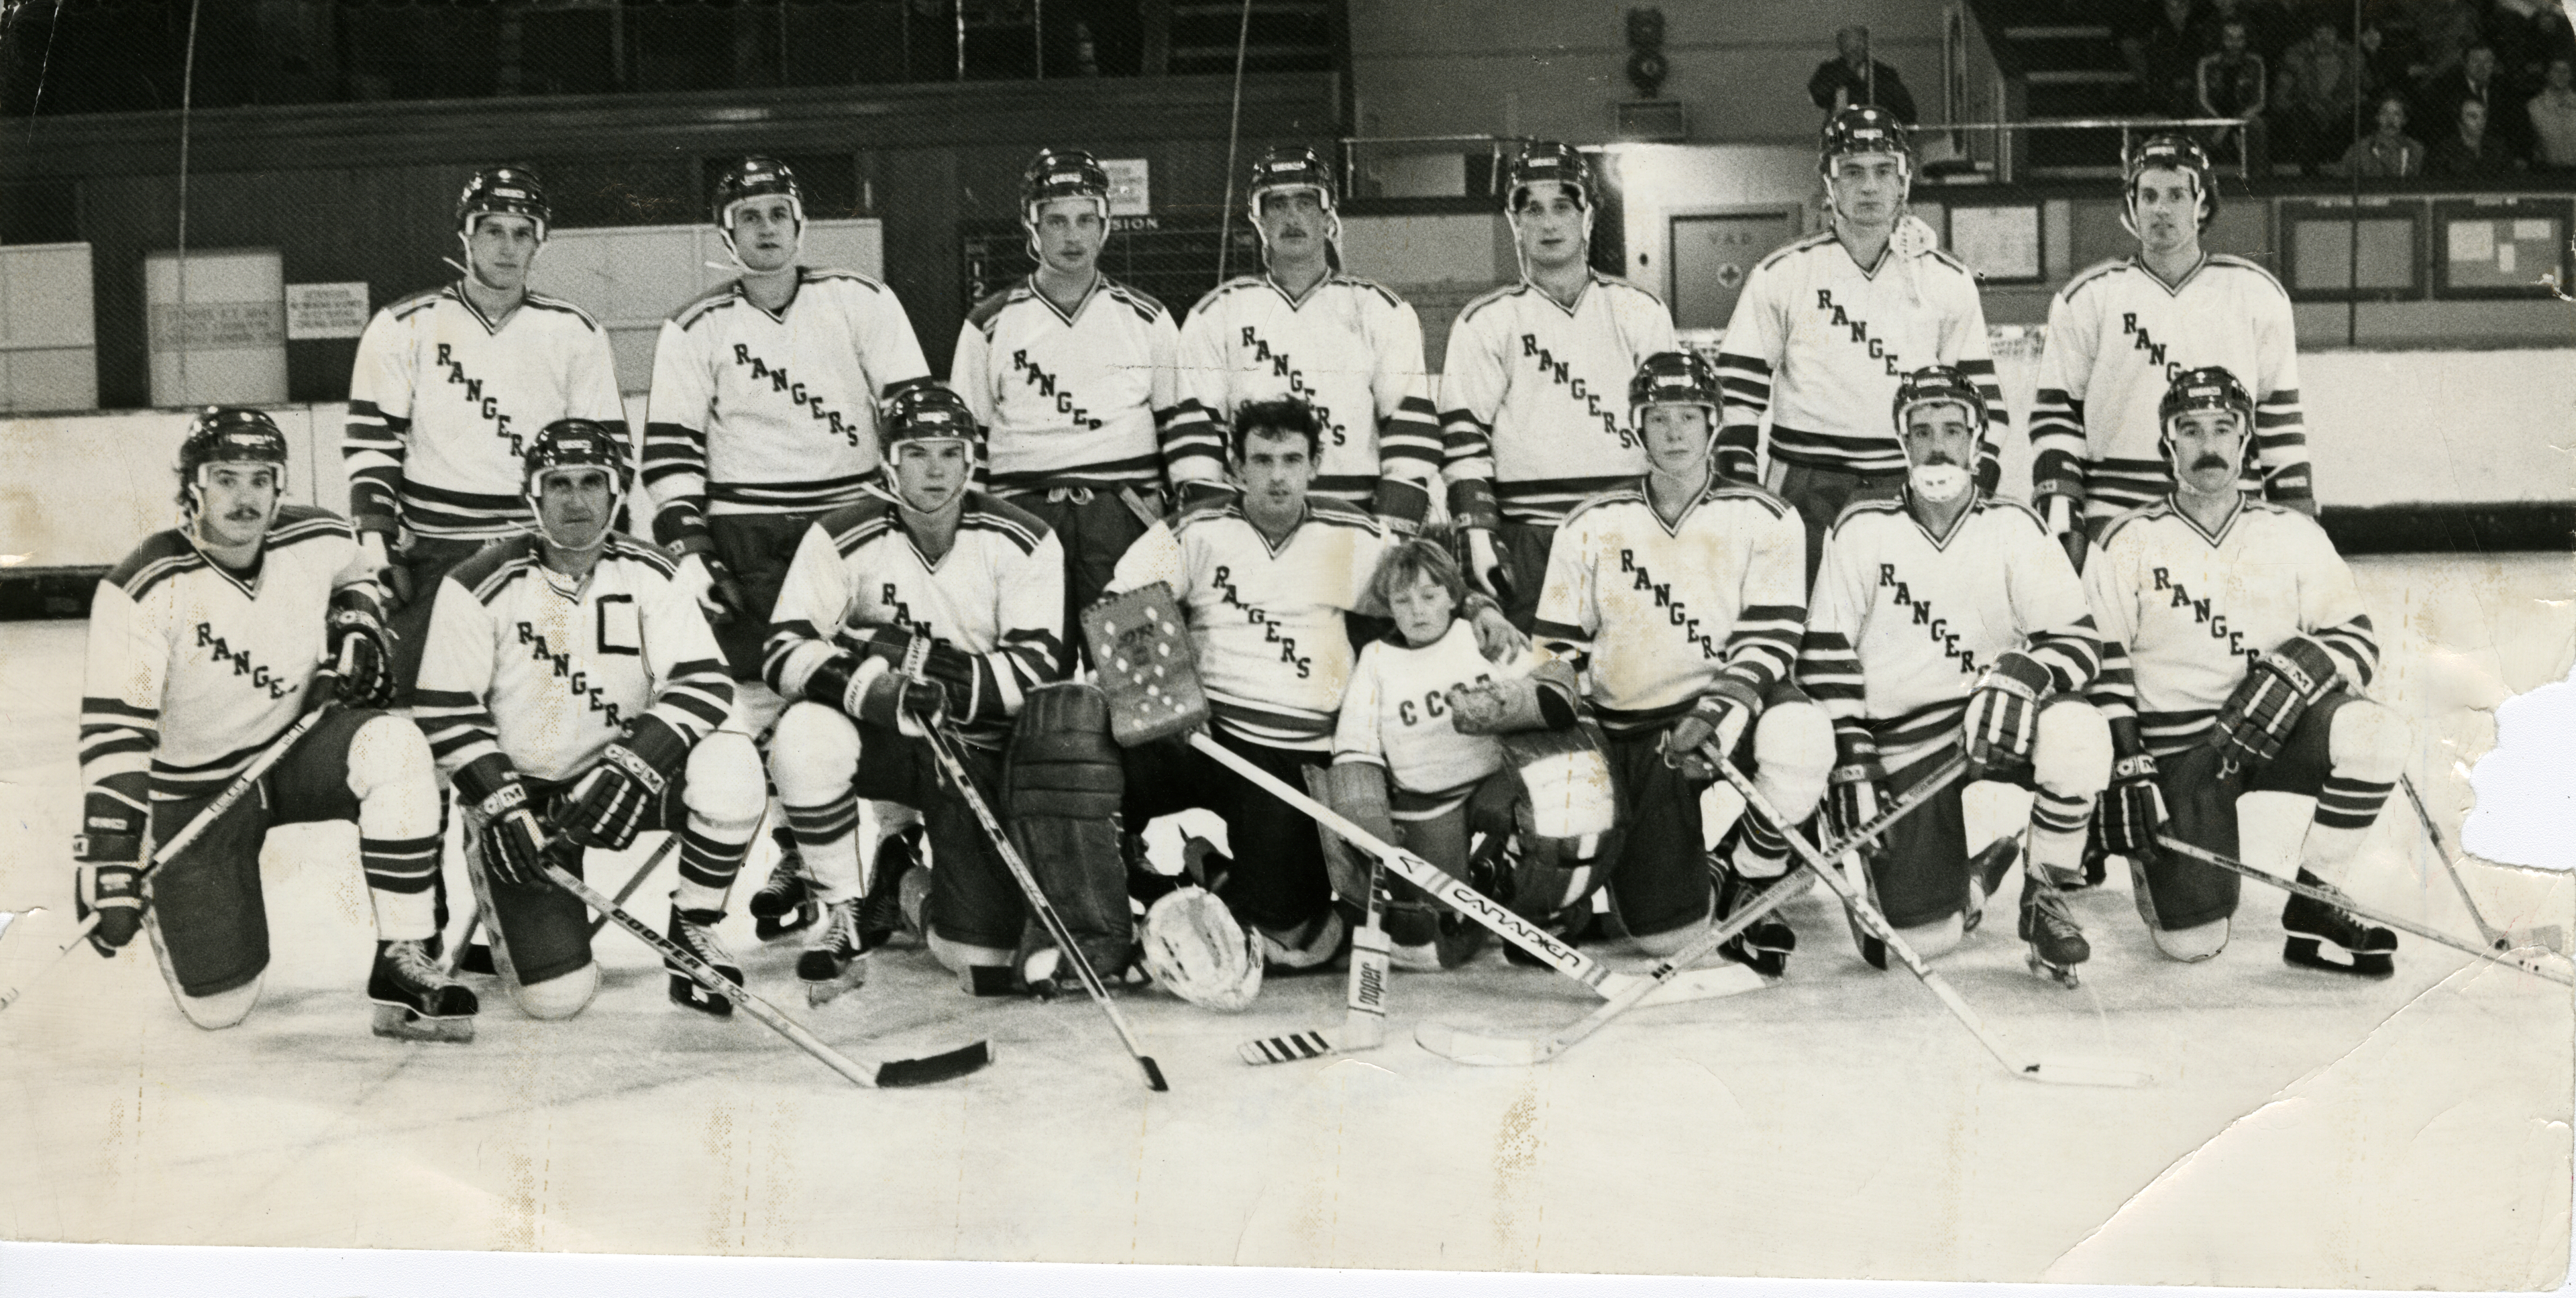 Joe Guilcher (front, far right) with the Dundee Rockets in their heyday.